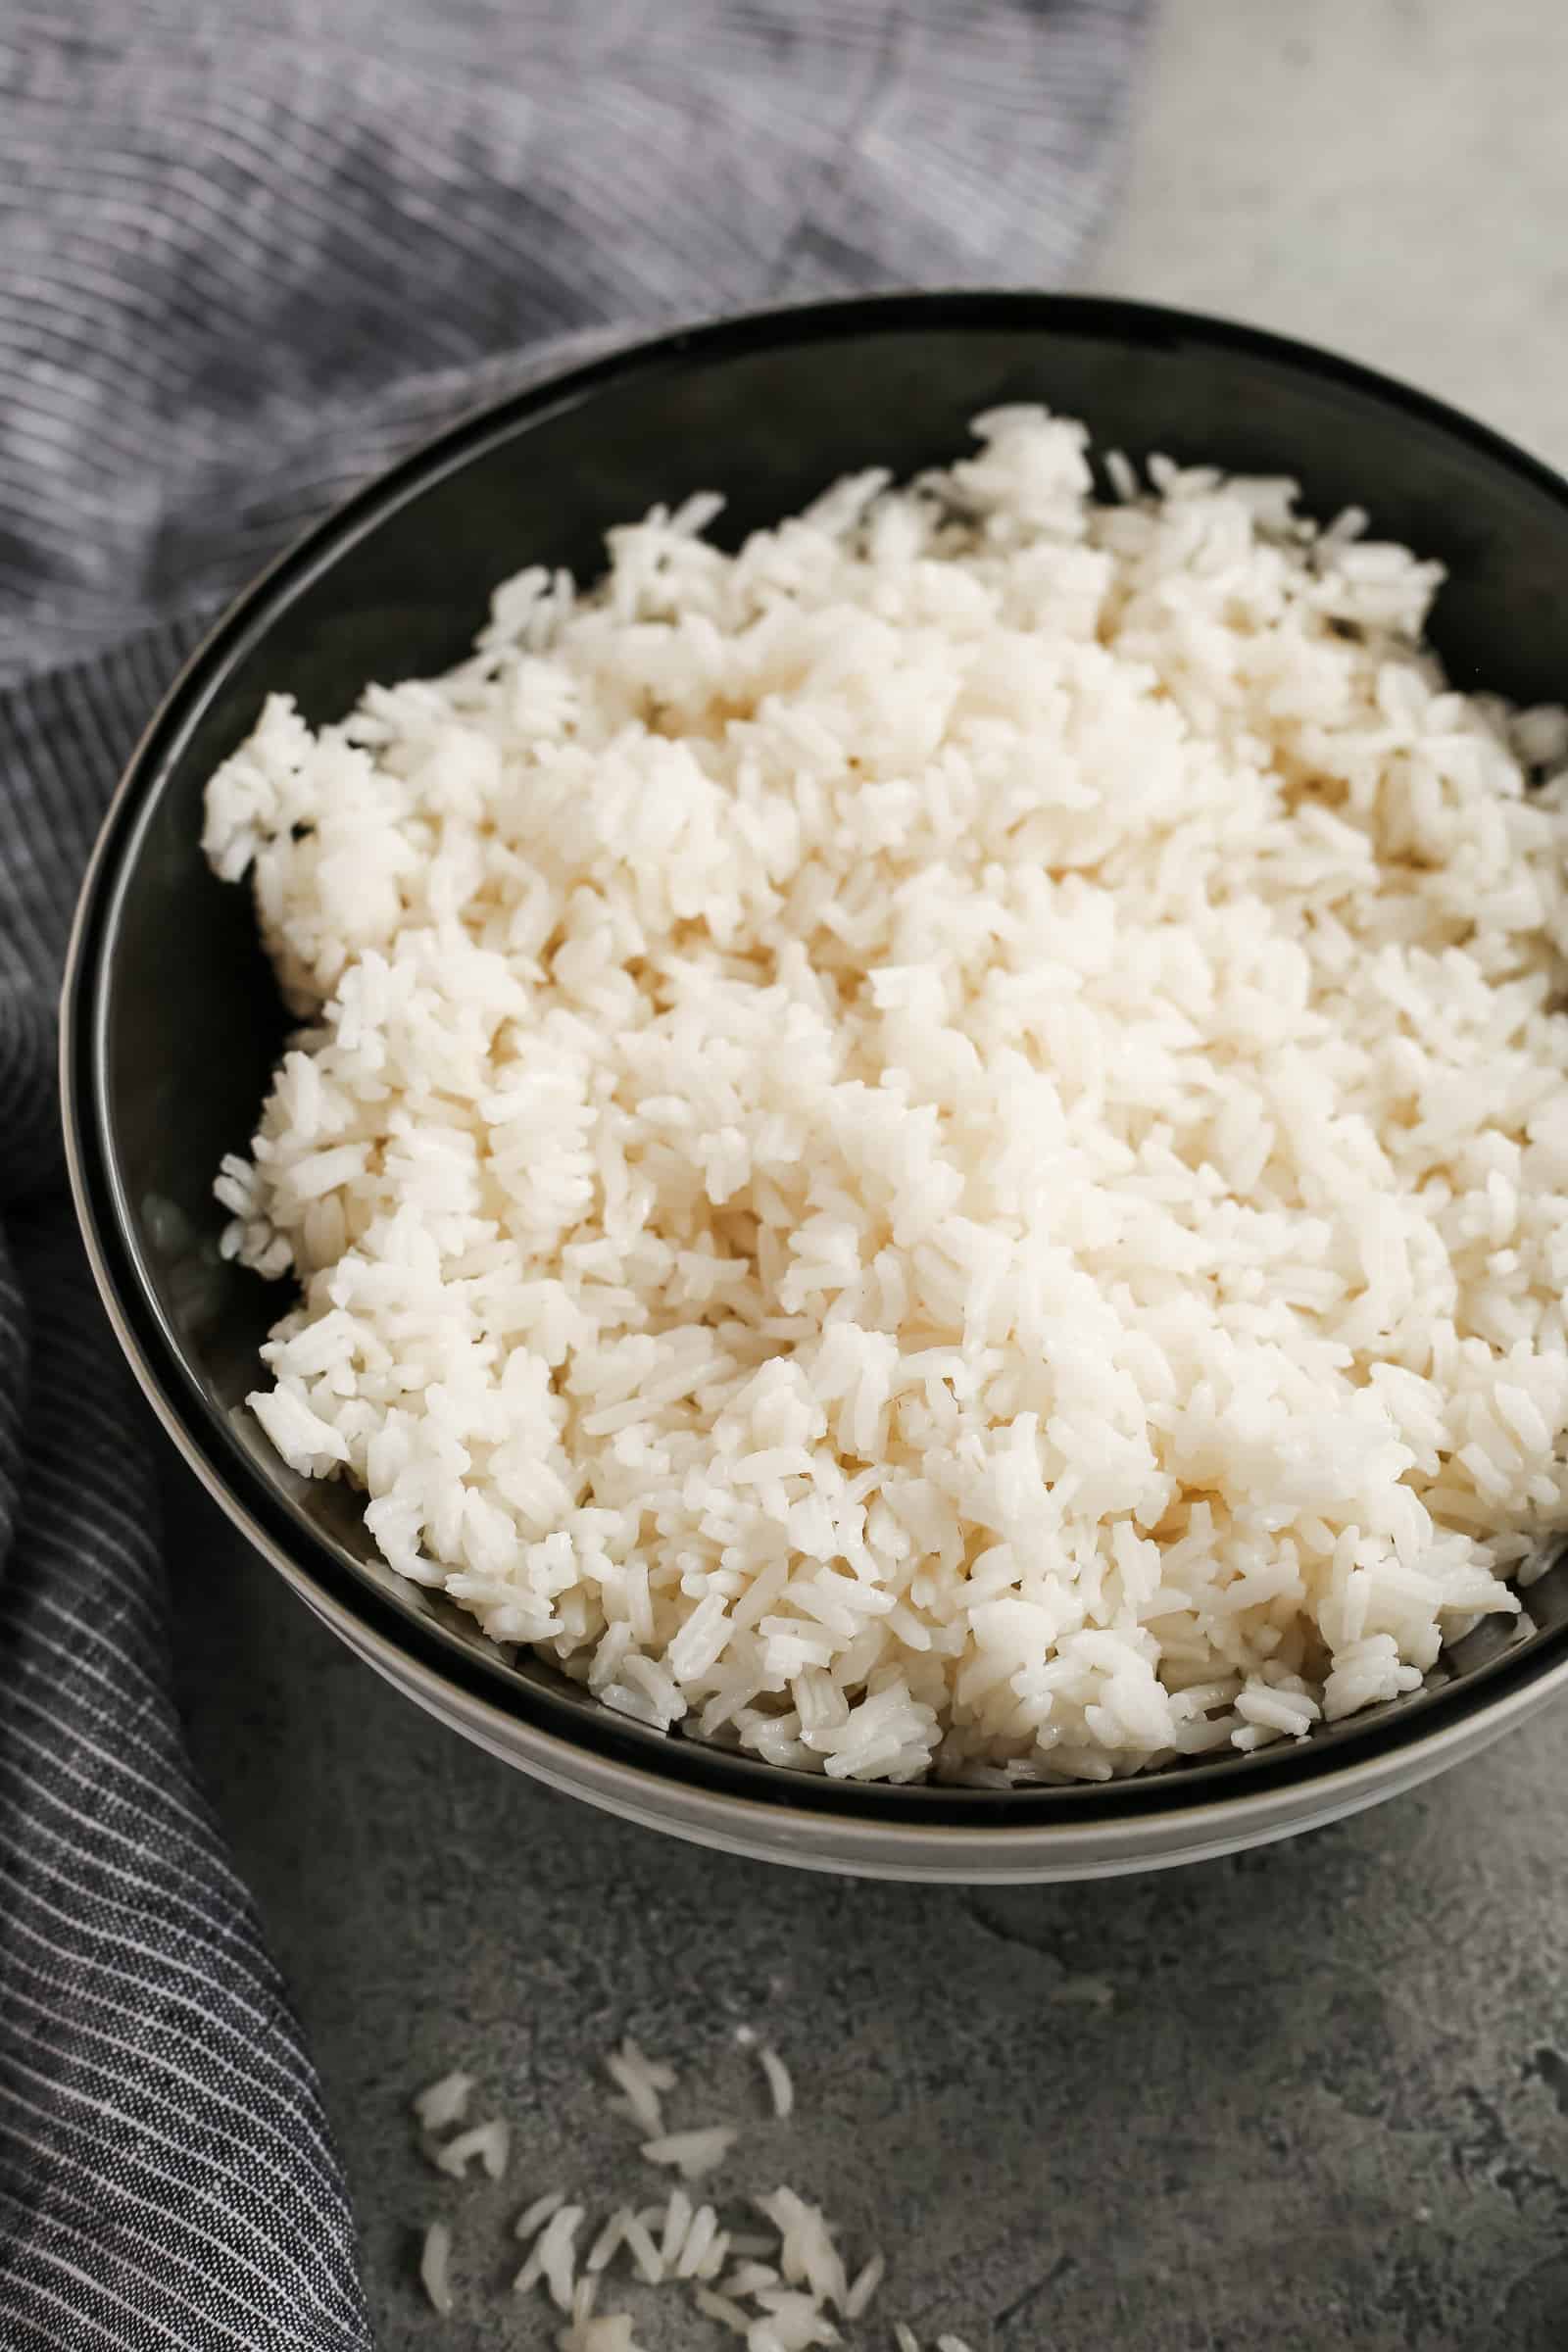 Mixing bowl of white rice, with the cooked grains looking fluffy and fresh